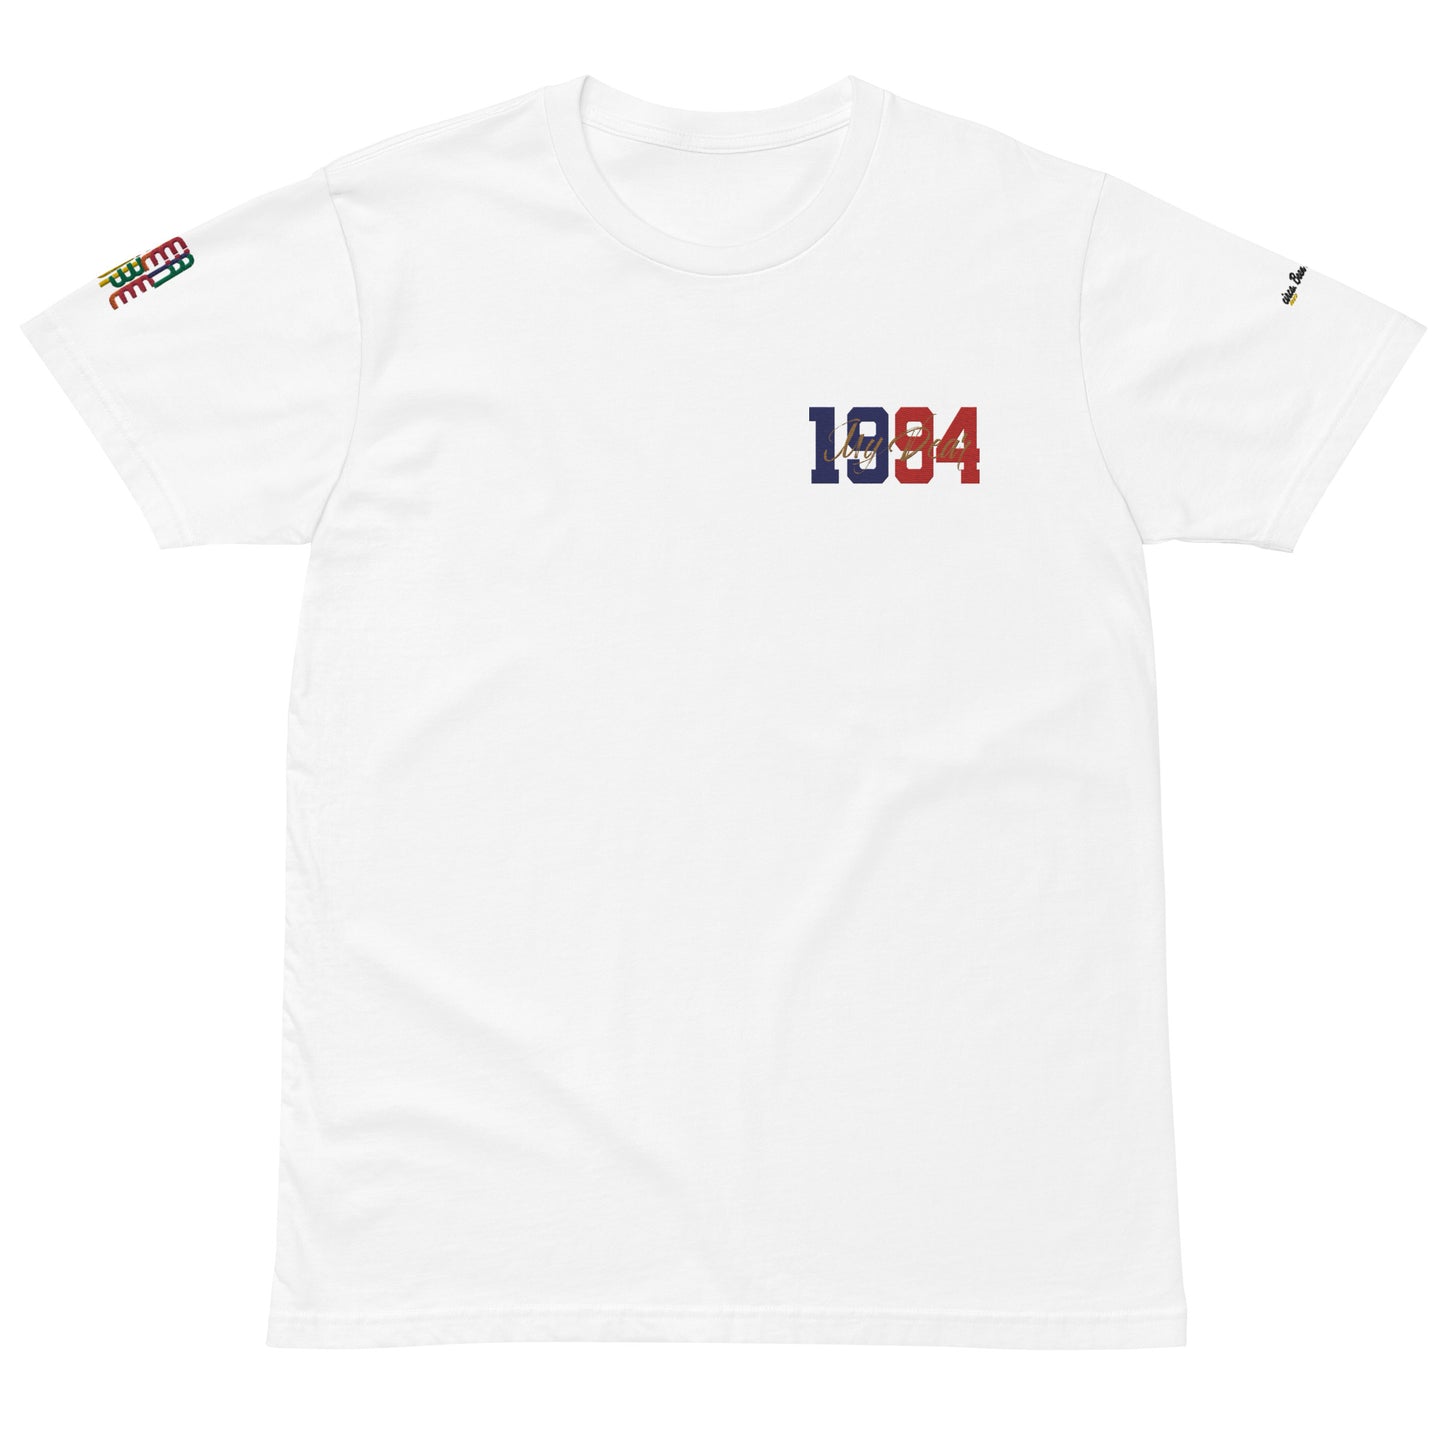 Back in 94" | Premium T-shirt | Pre-Shrunk White | Embroidered